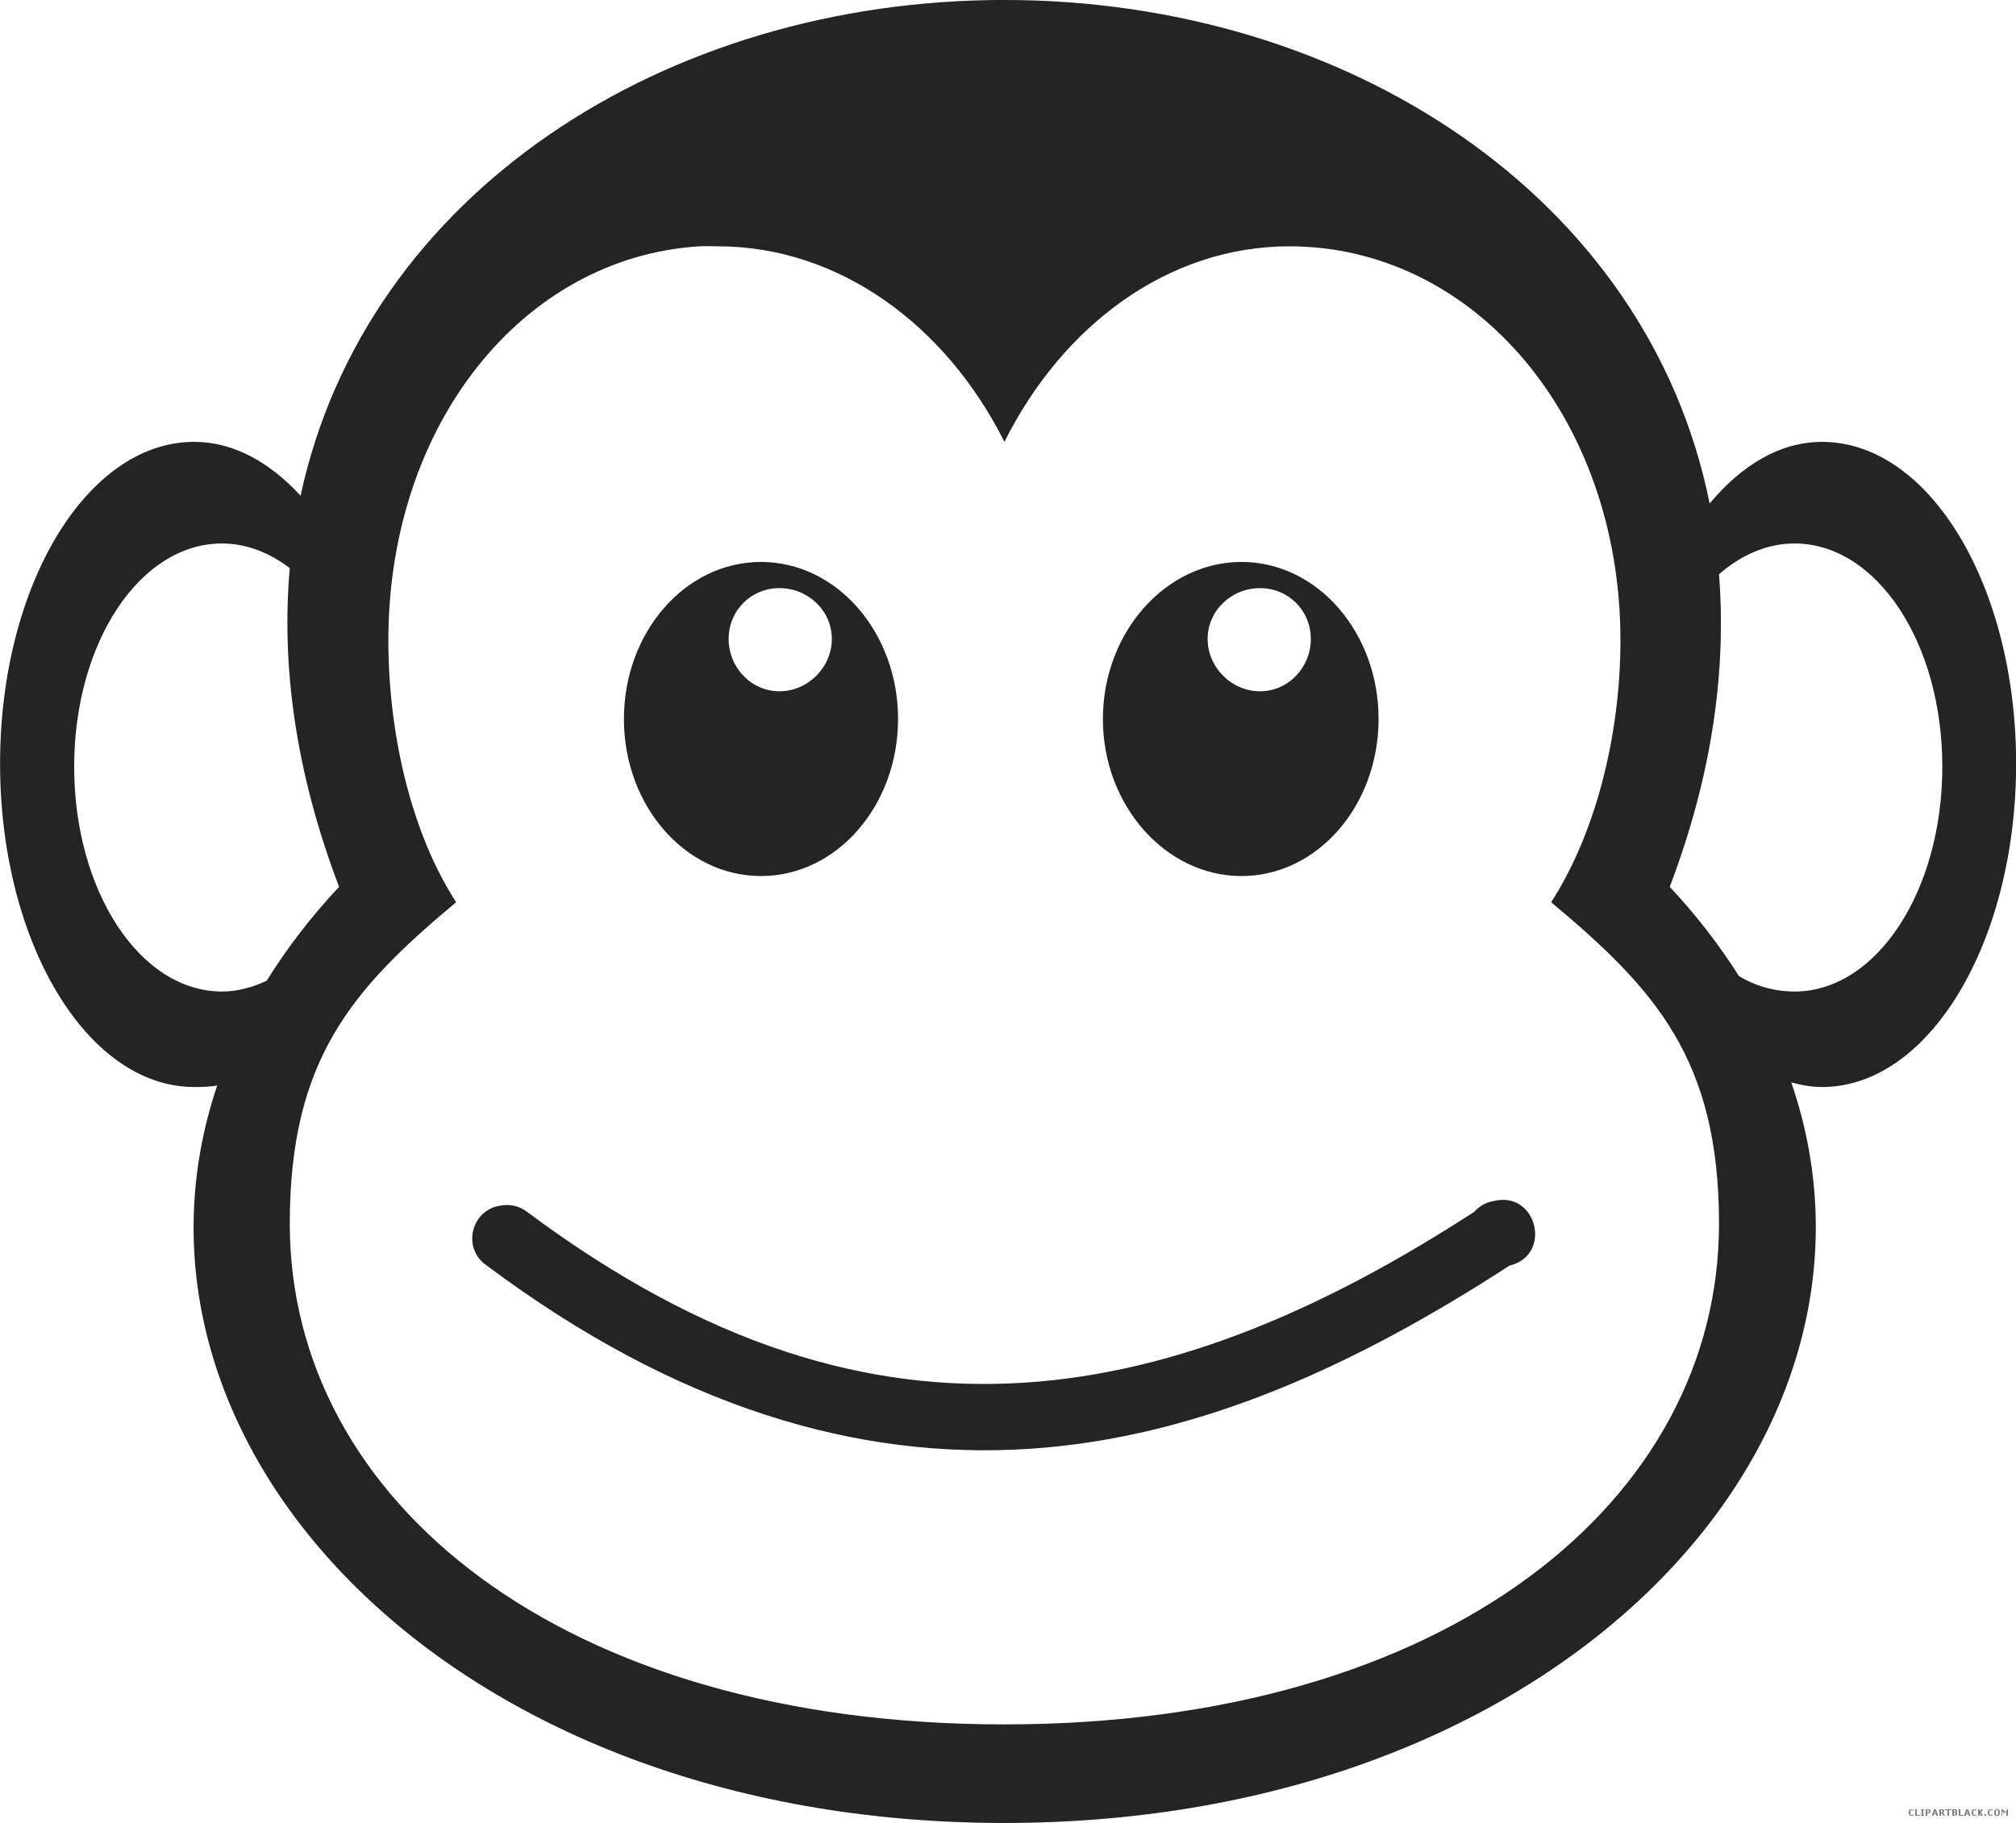 Monkey Face Animal Free Black White Clipart Images - Simple Cartoon Monkey  Face - (2500x2261) Png Clipart Download